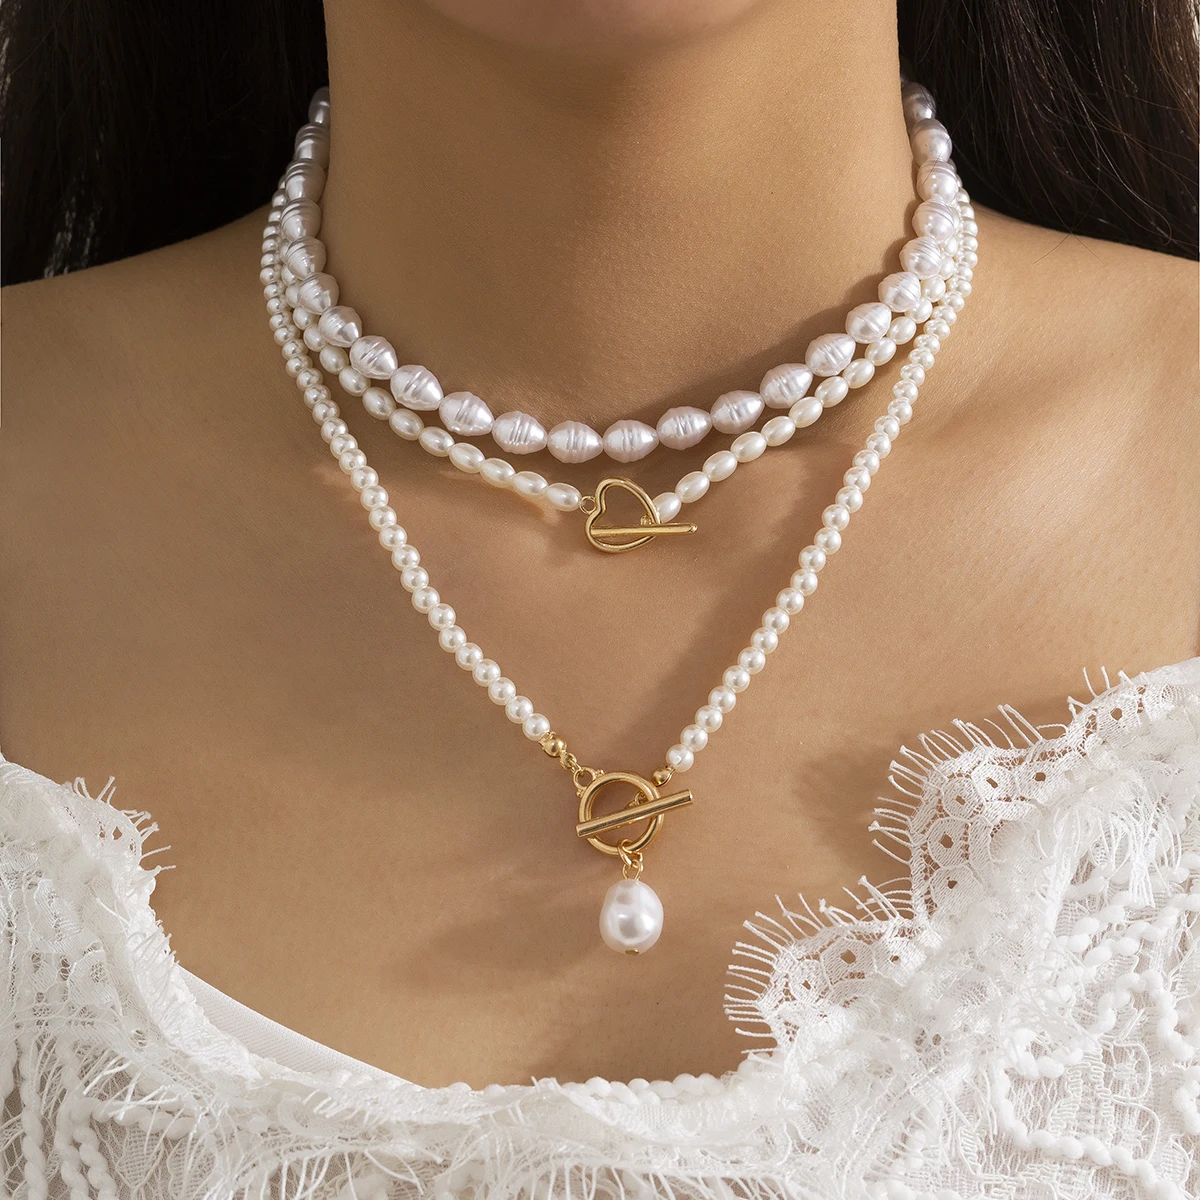 

New Baroque Simulated Pearls Necklace For Women Vintage Elegant Multi Layer Short Clavicle Chain Choker Geometric Lasso Jewelry